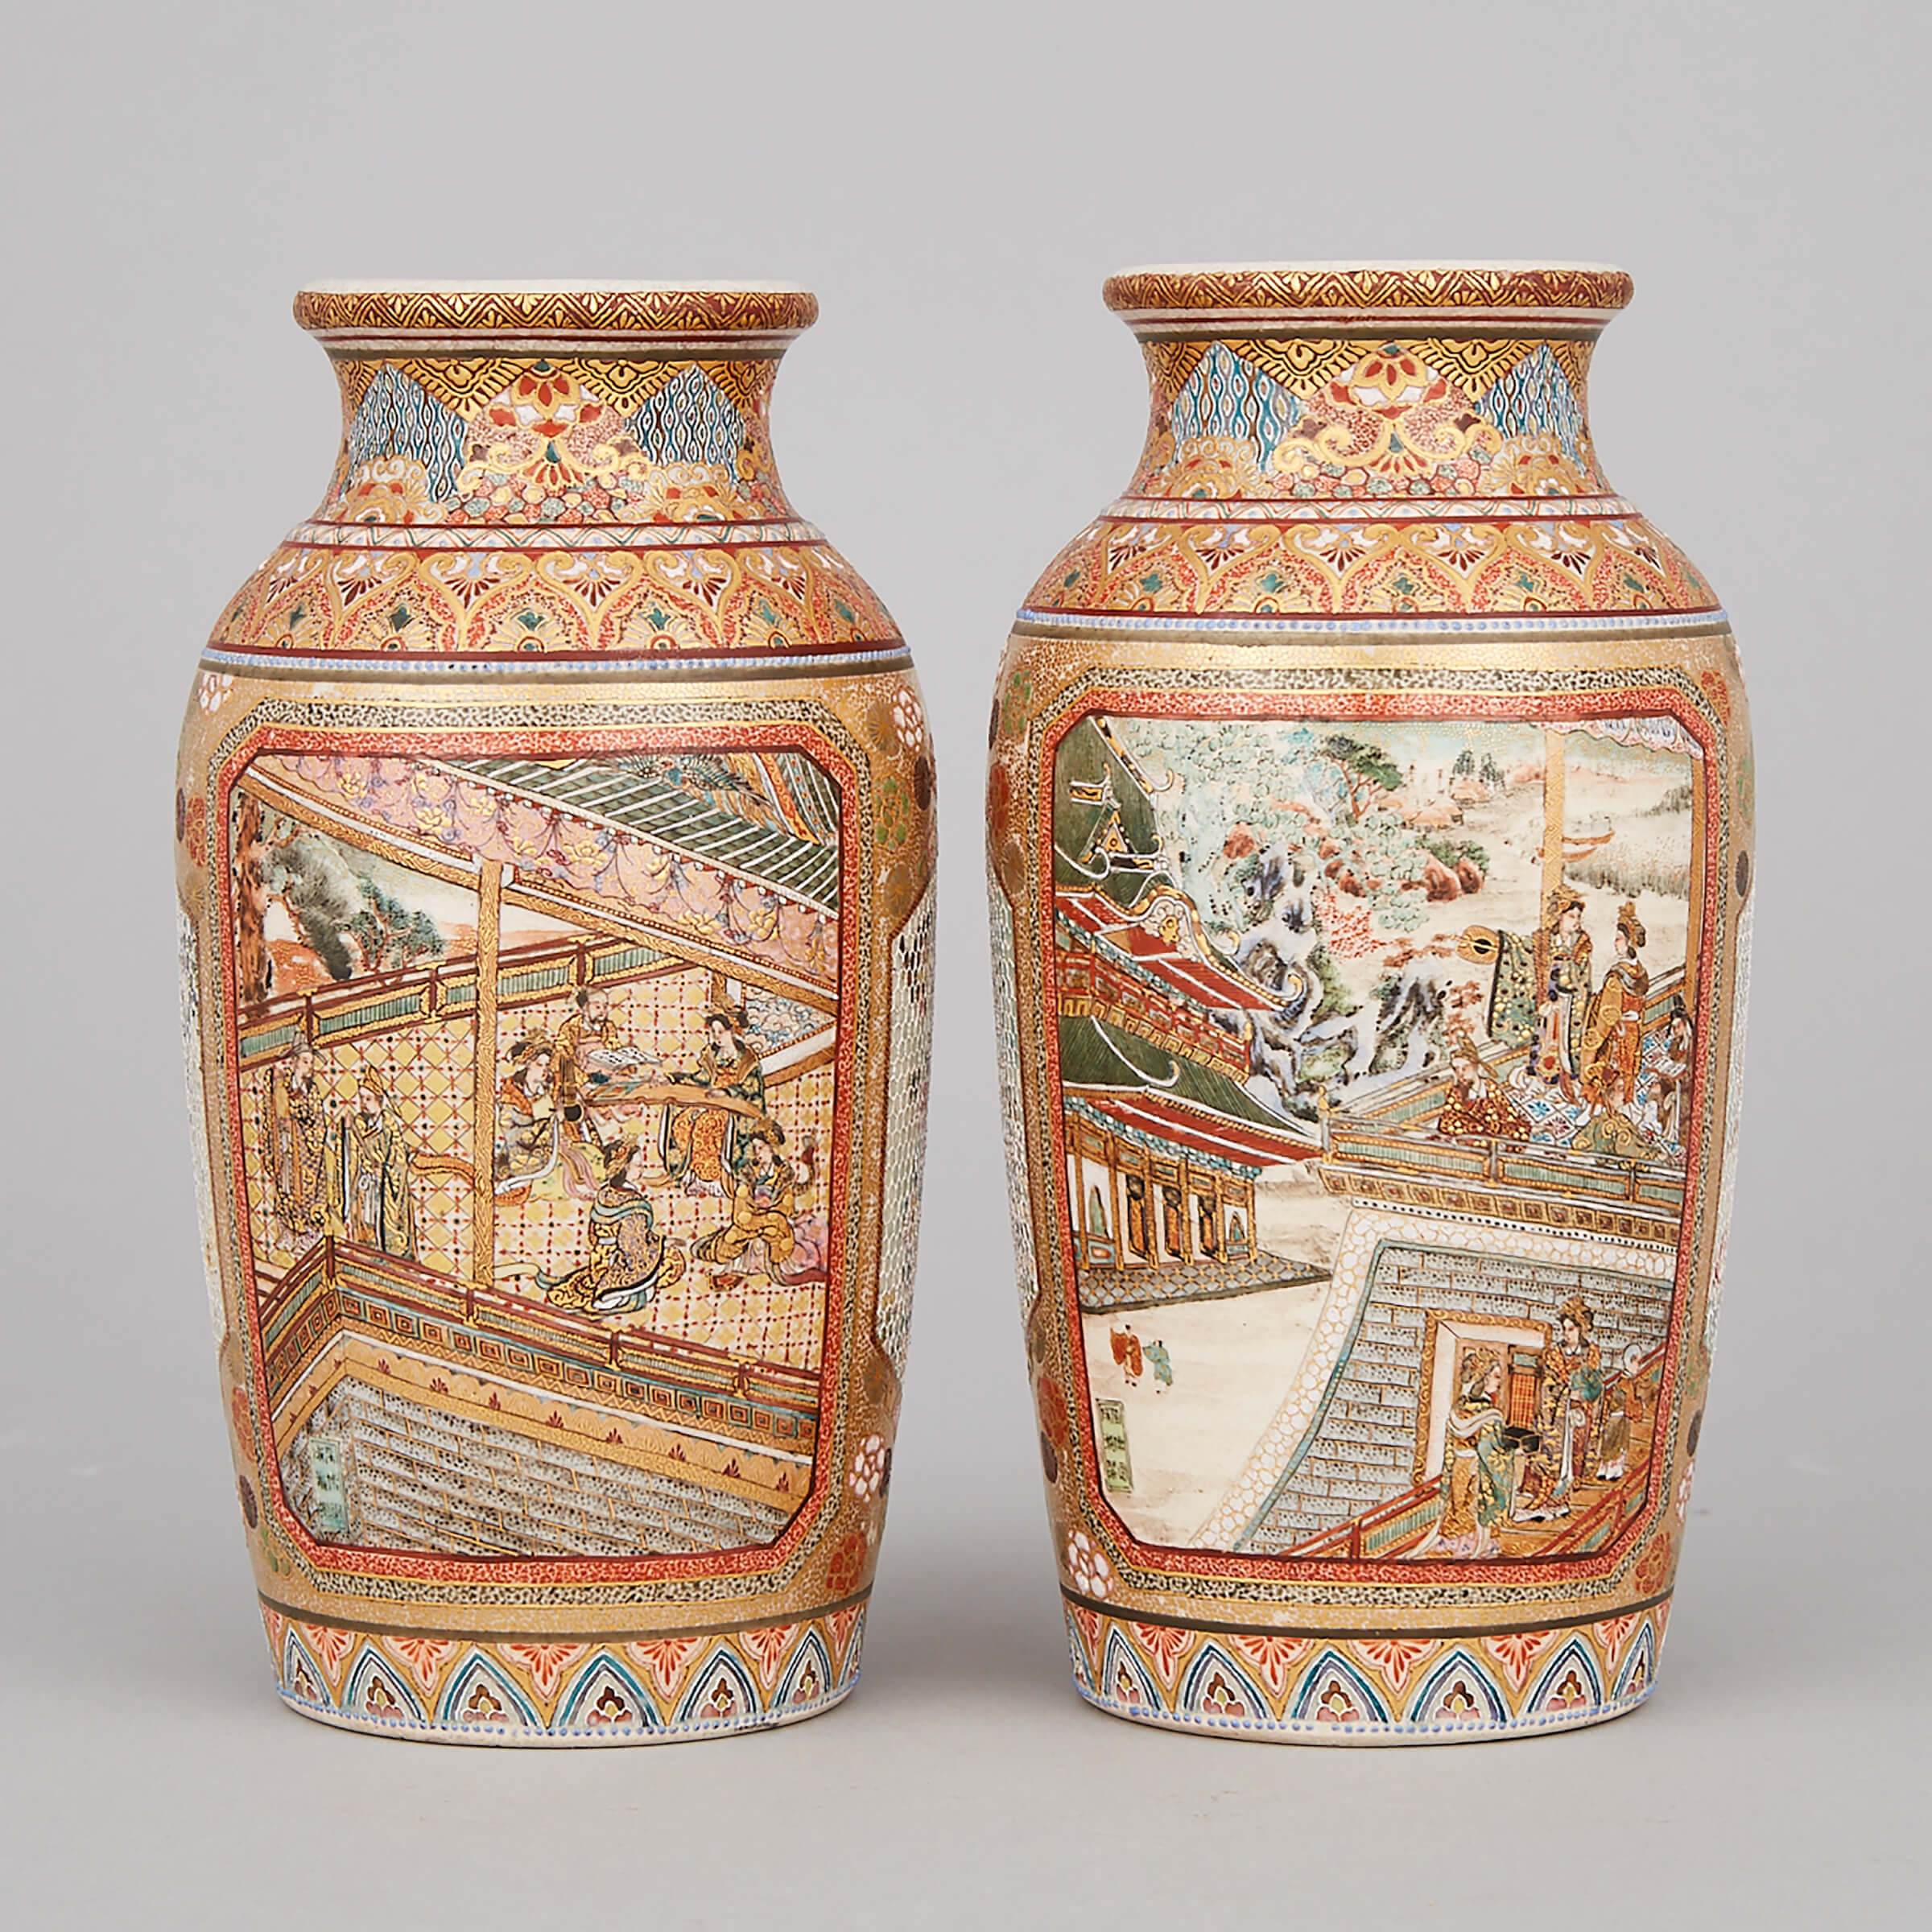 A Pair of Satsuma Vases, Early 20th Century